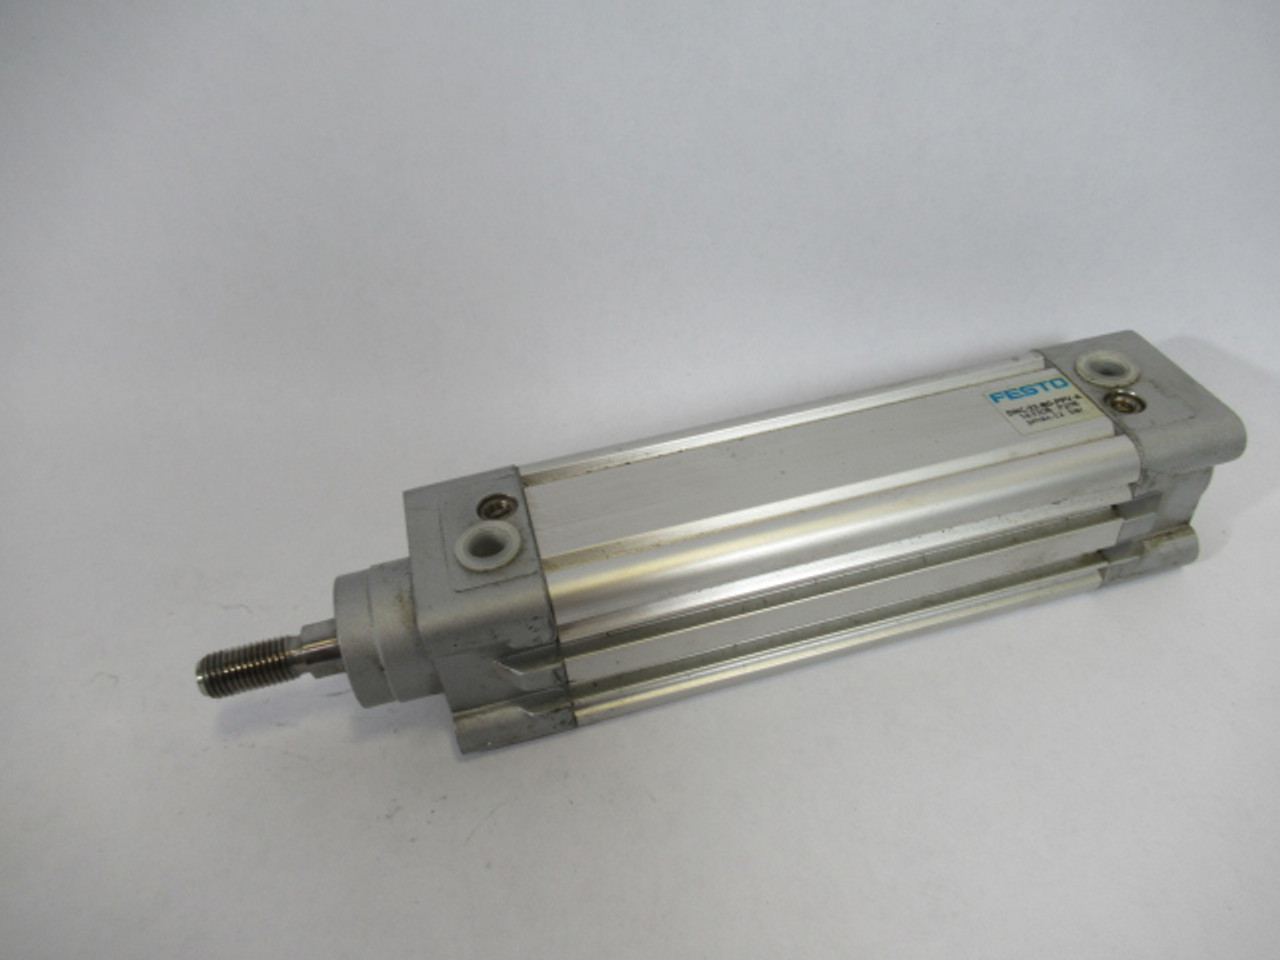 Festo 163308 DNC-32-80-PPV-A Pneumatic Cylinder 32mm Bore 80mm Stroke USED